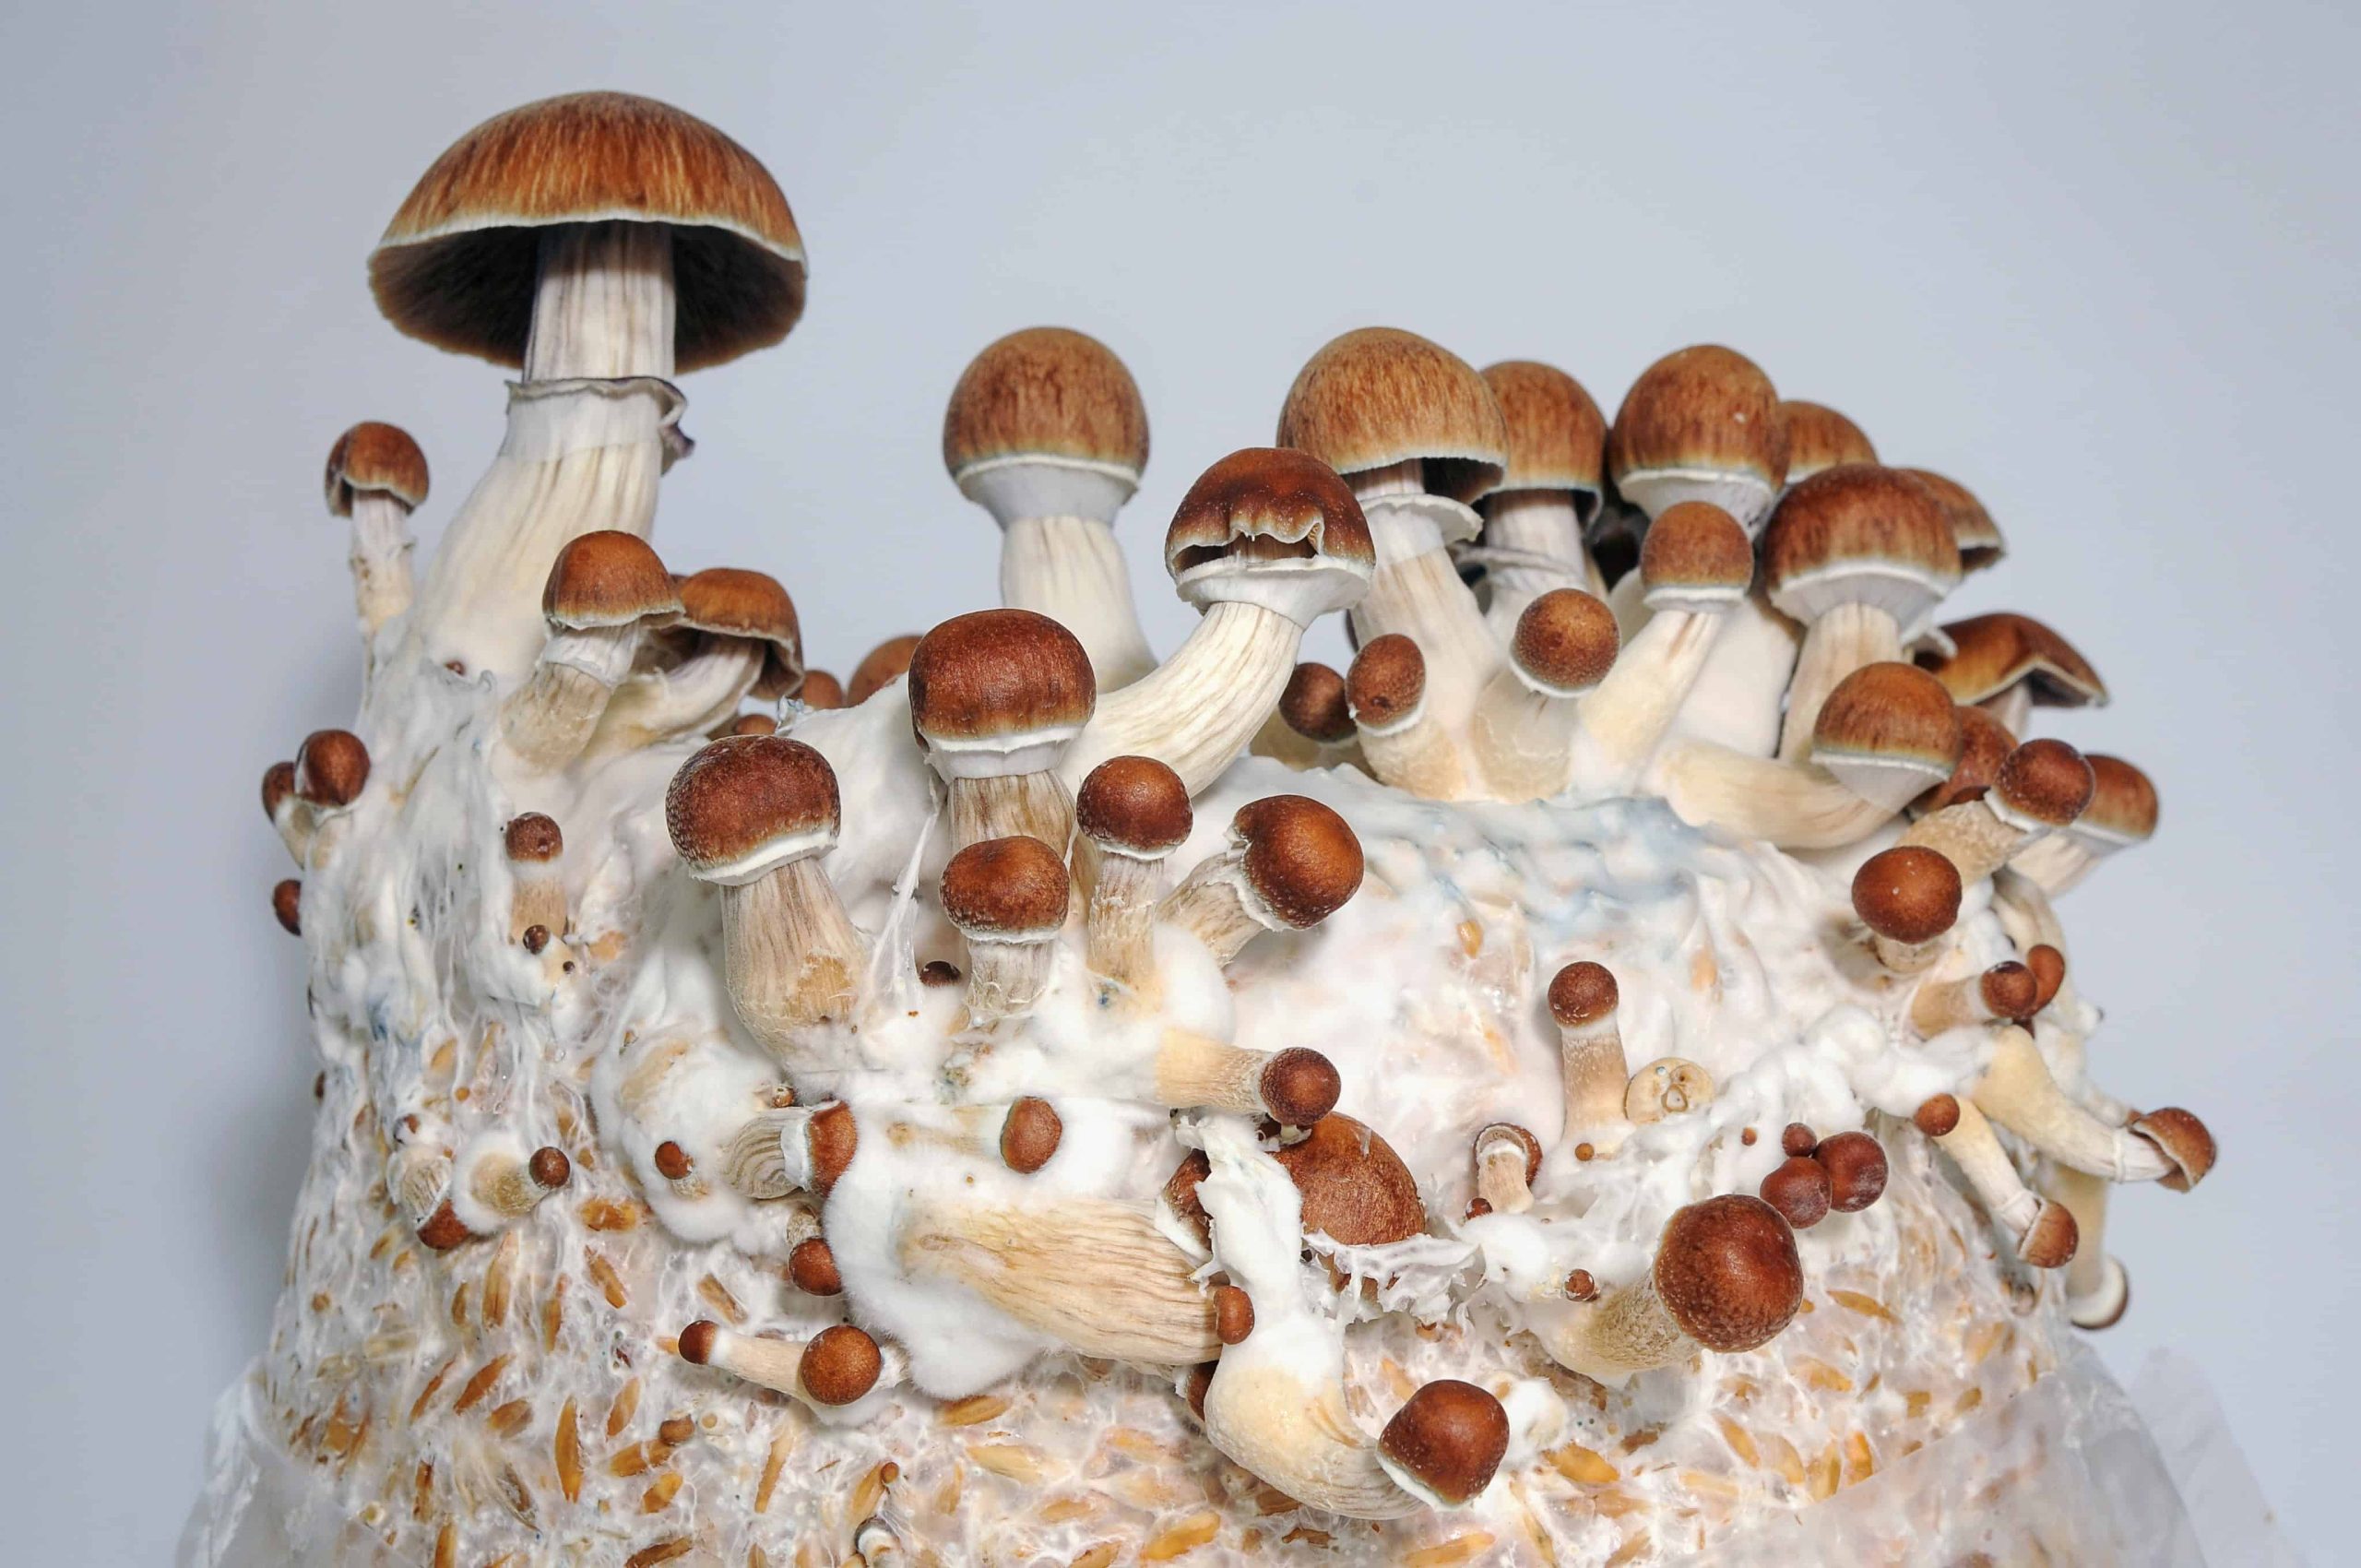 Illinois Lawmaker Introduces Psychedelics Legalization Bill